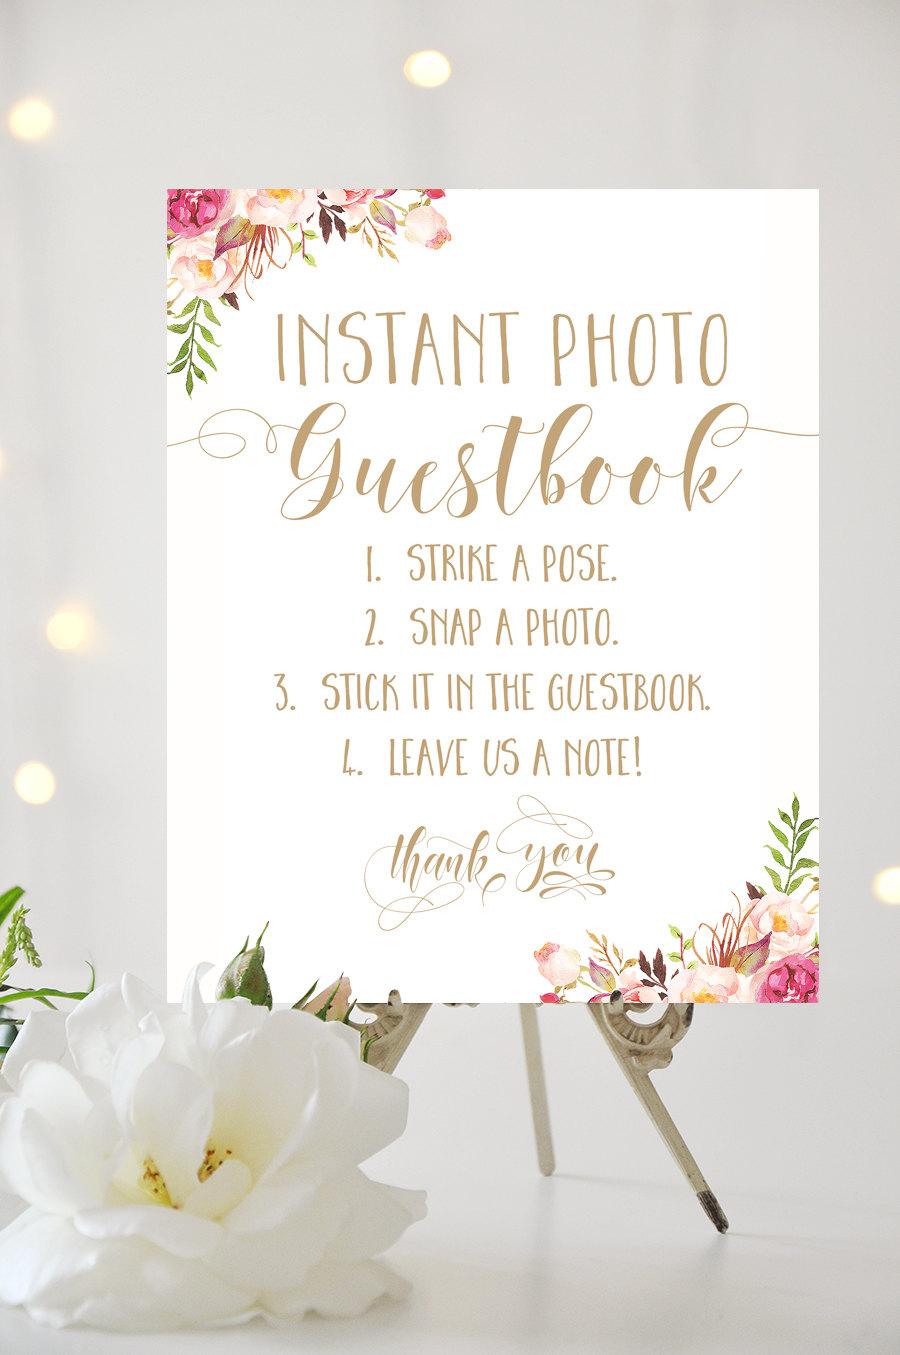 Hochzeit - Instant Photo Guestbook Sign - 8 x 10 - Printable sign in "Shine" antique gold  - Romantic Blooms - PDF and JPG files - Instant Download